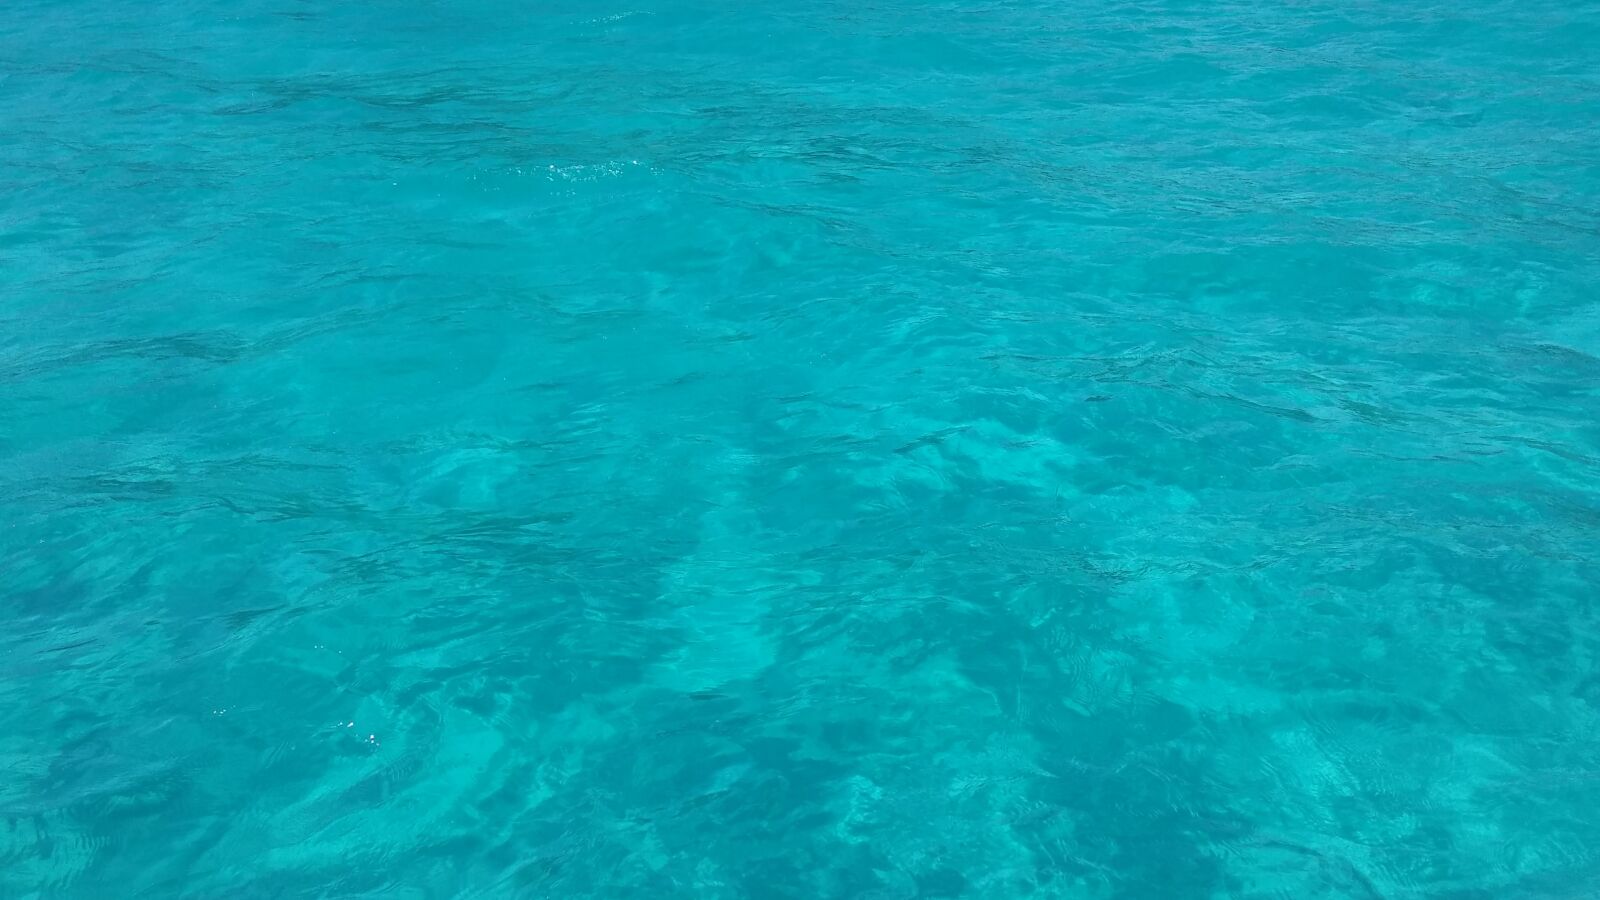 LG G2 sample photo. Water, ocean, turquoise waters photography